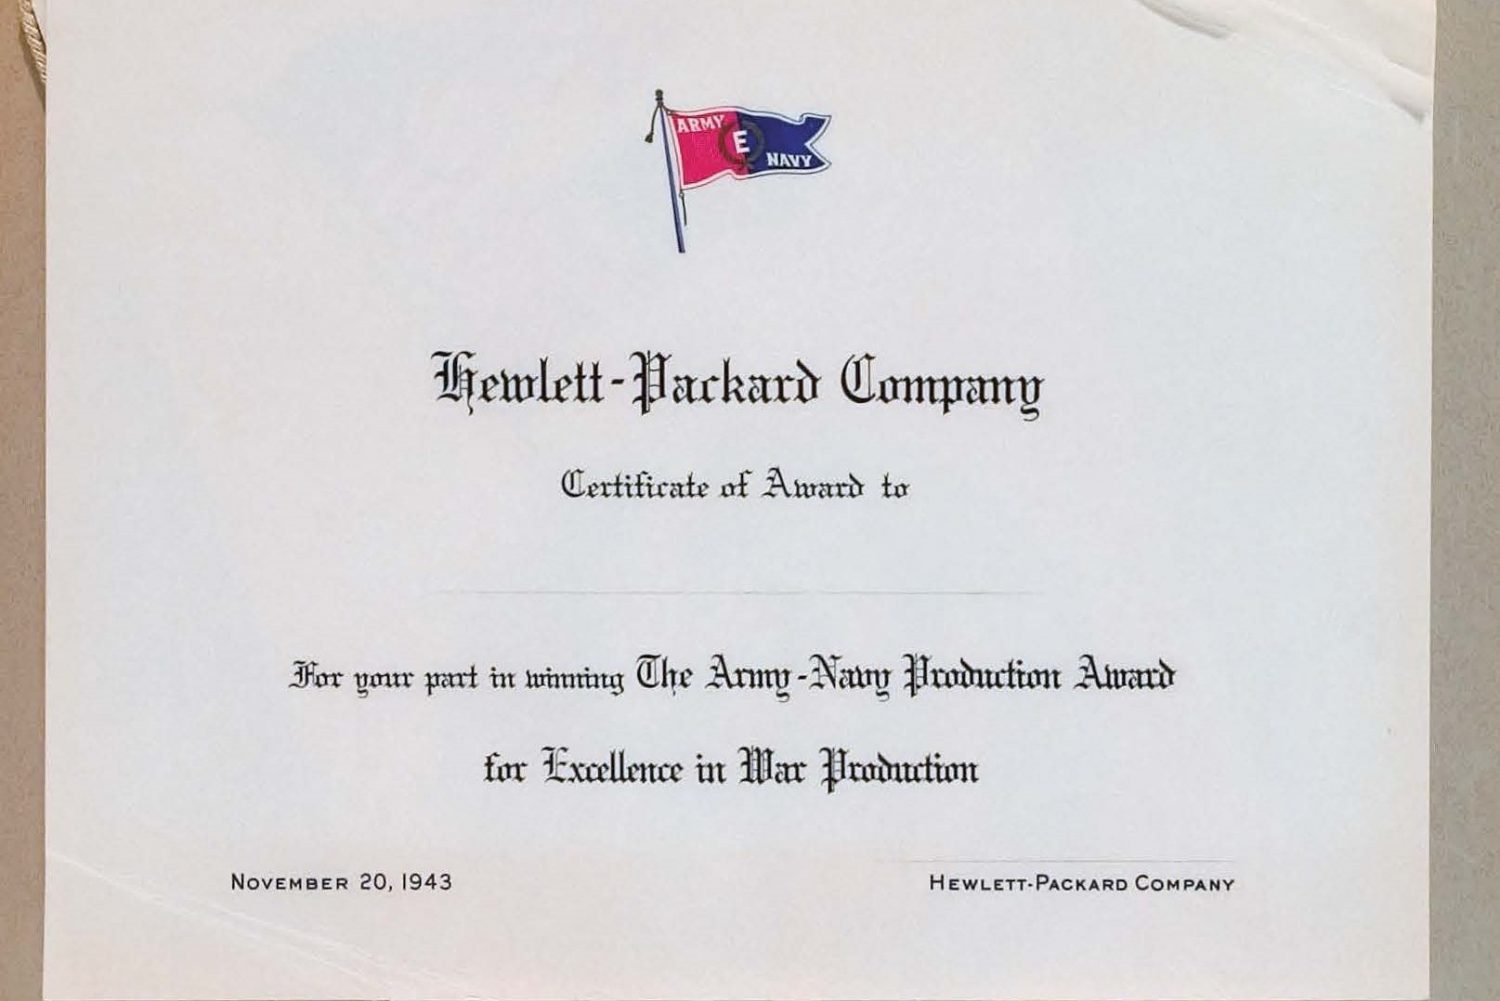 A blank certificate to HP employees from the company recognizing their role in winning the Army-Navy 